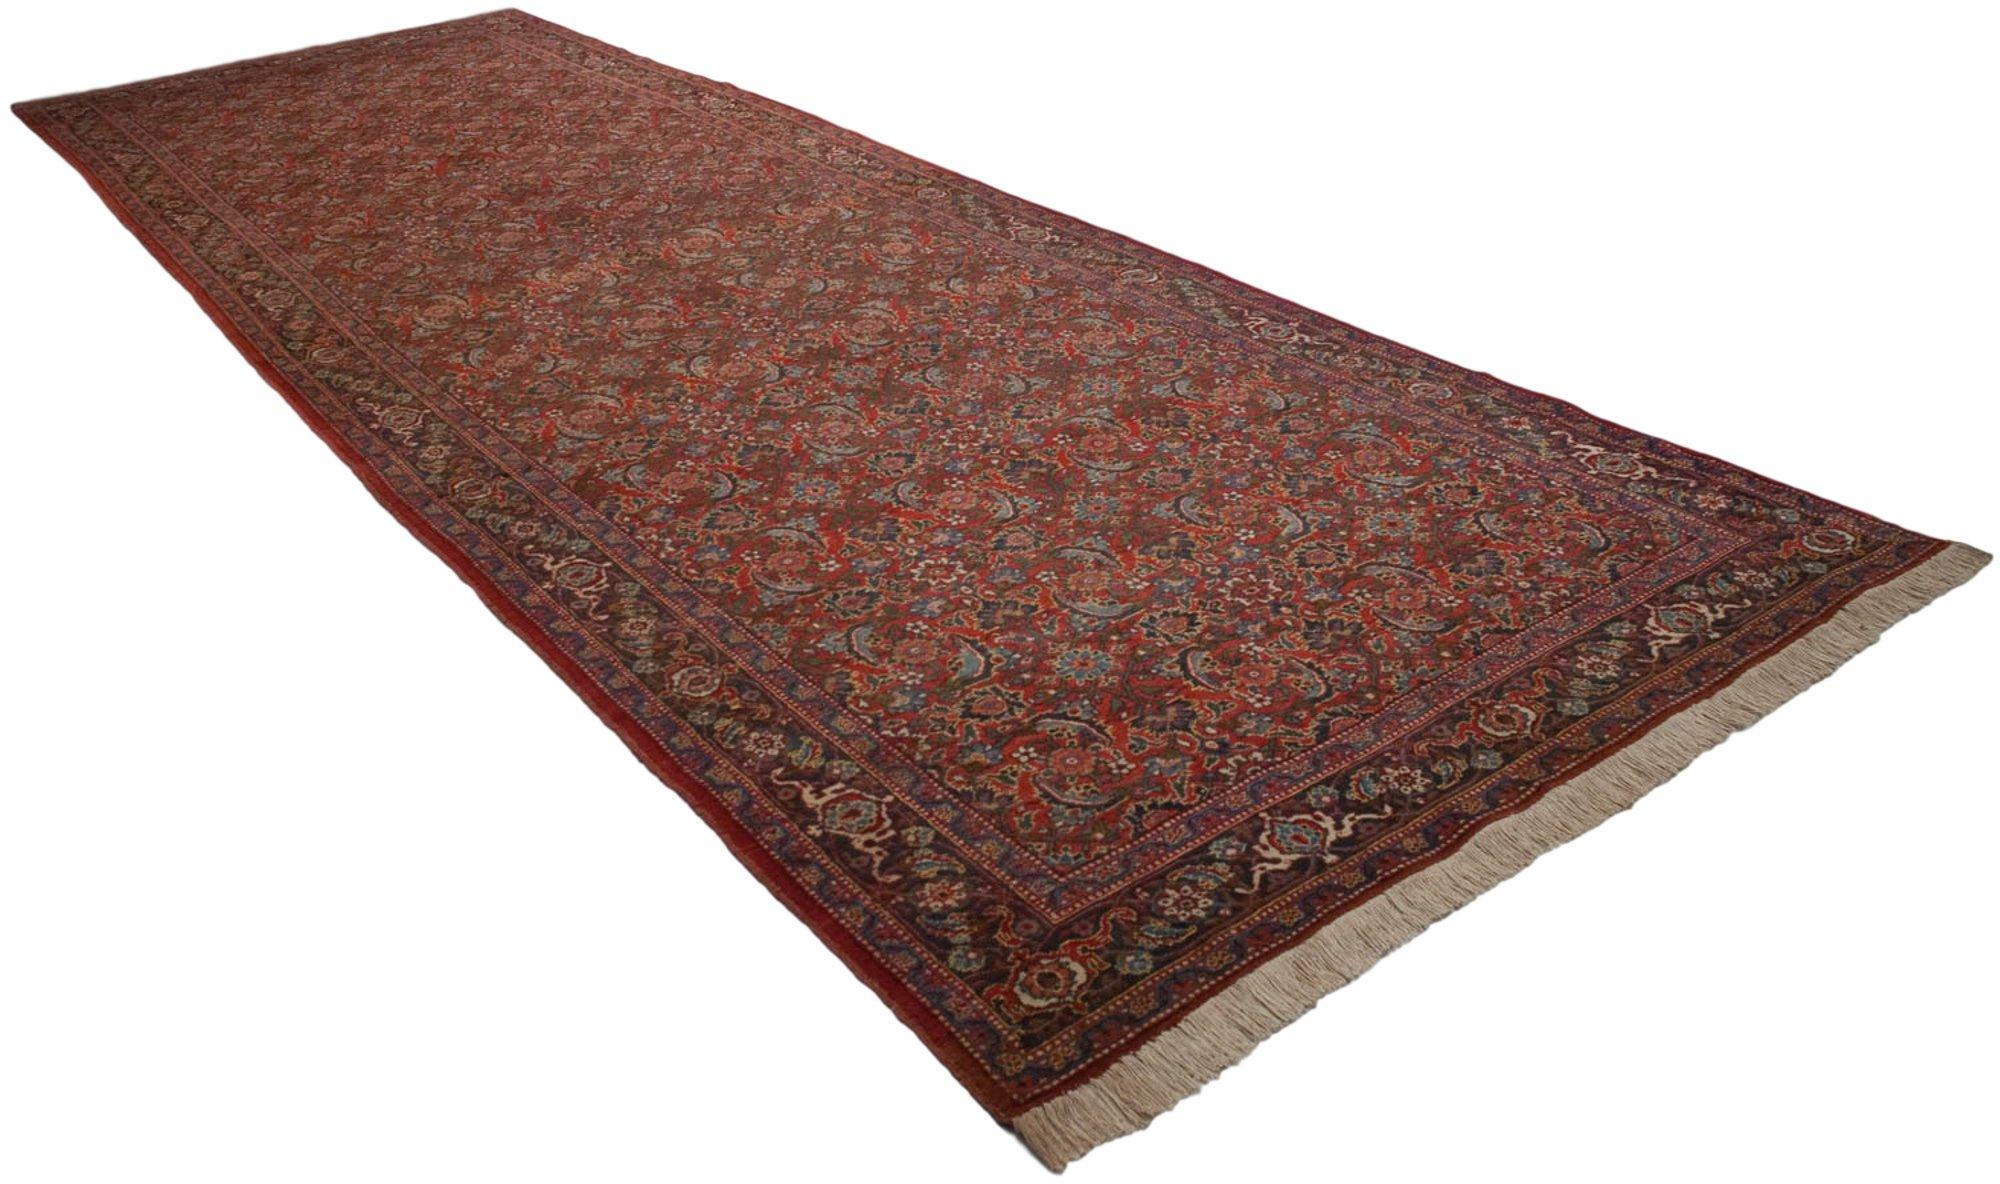 :: Allover covered field in a Herati motif with a narrow banded main border in a reciprocating turtle design. Colors and shades include: Brick red, powder blue, navy blue, dusty denim, sky blue, beige, mallard green, faded saffron yellow, and more.